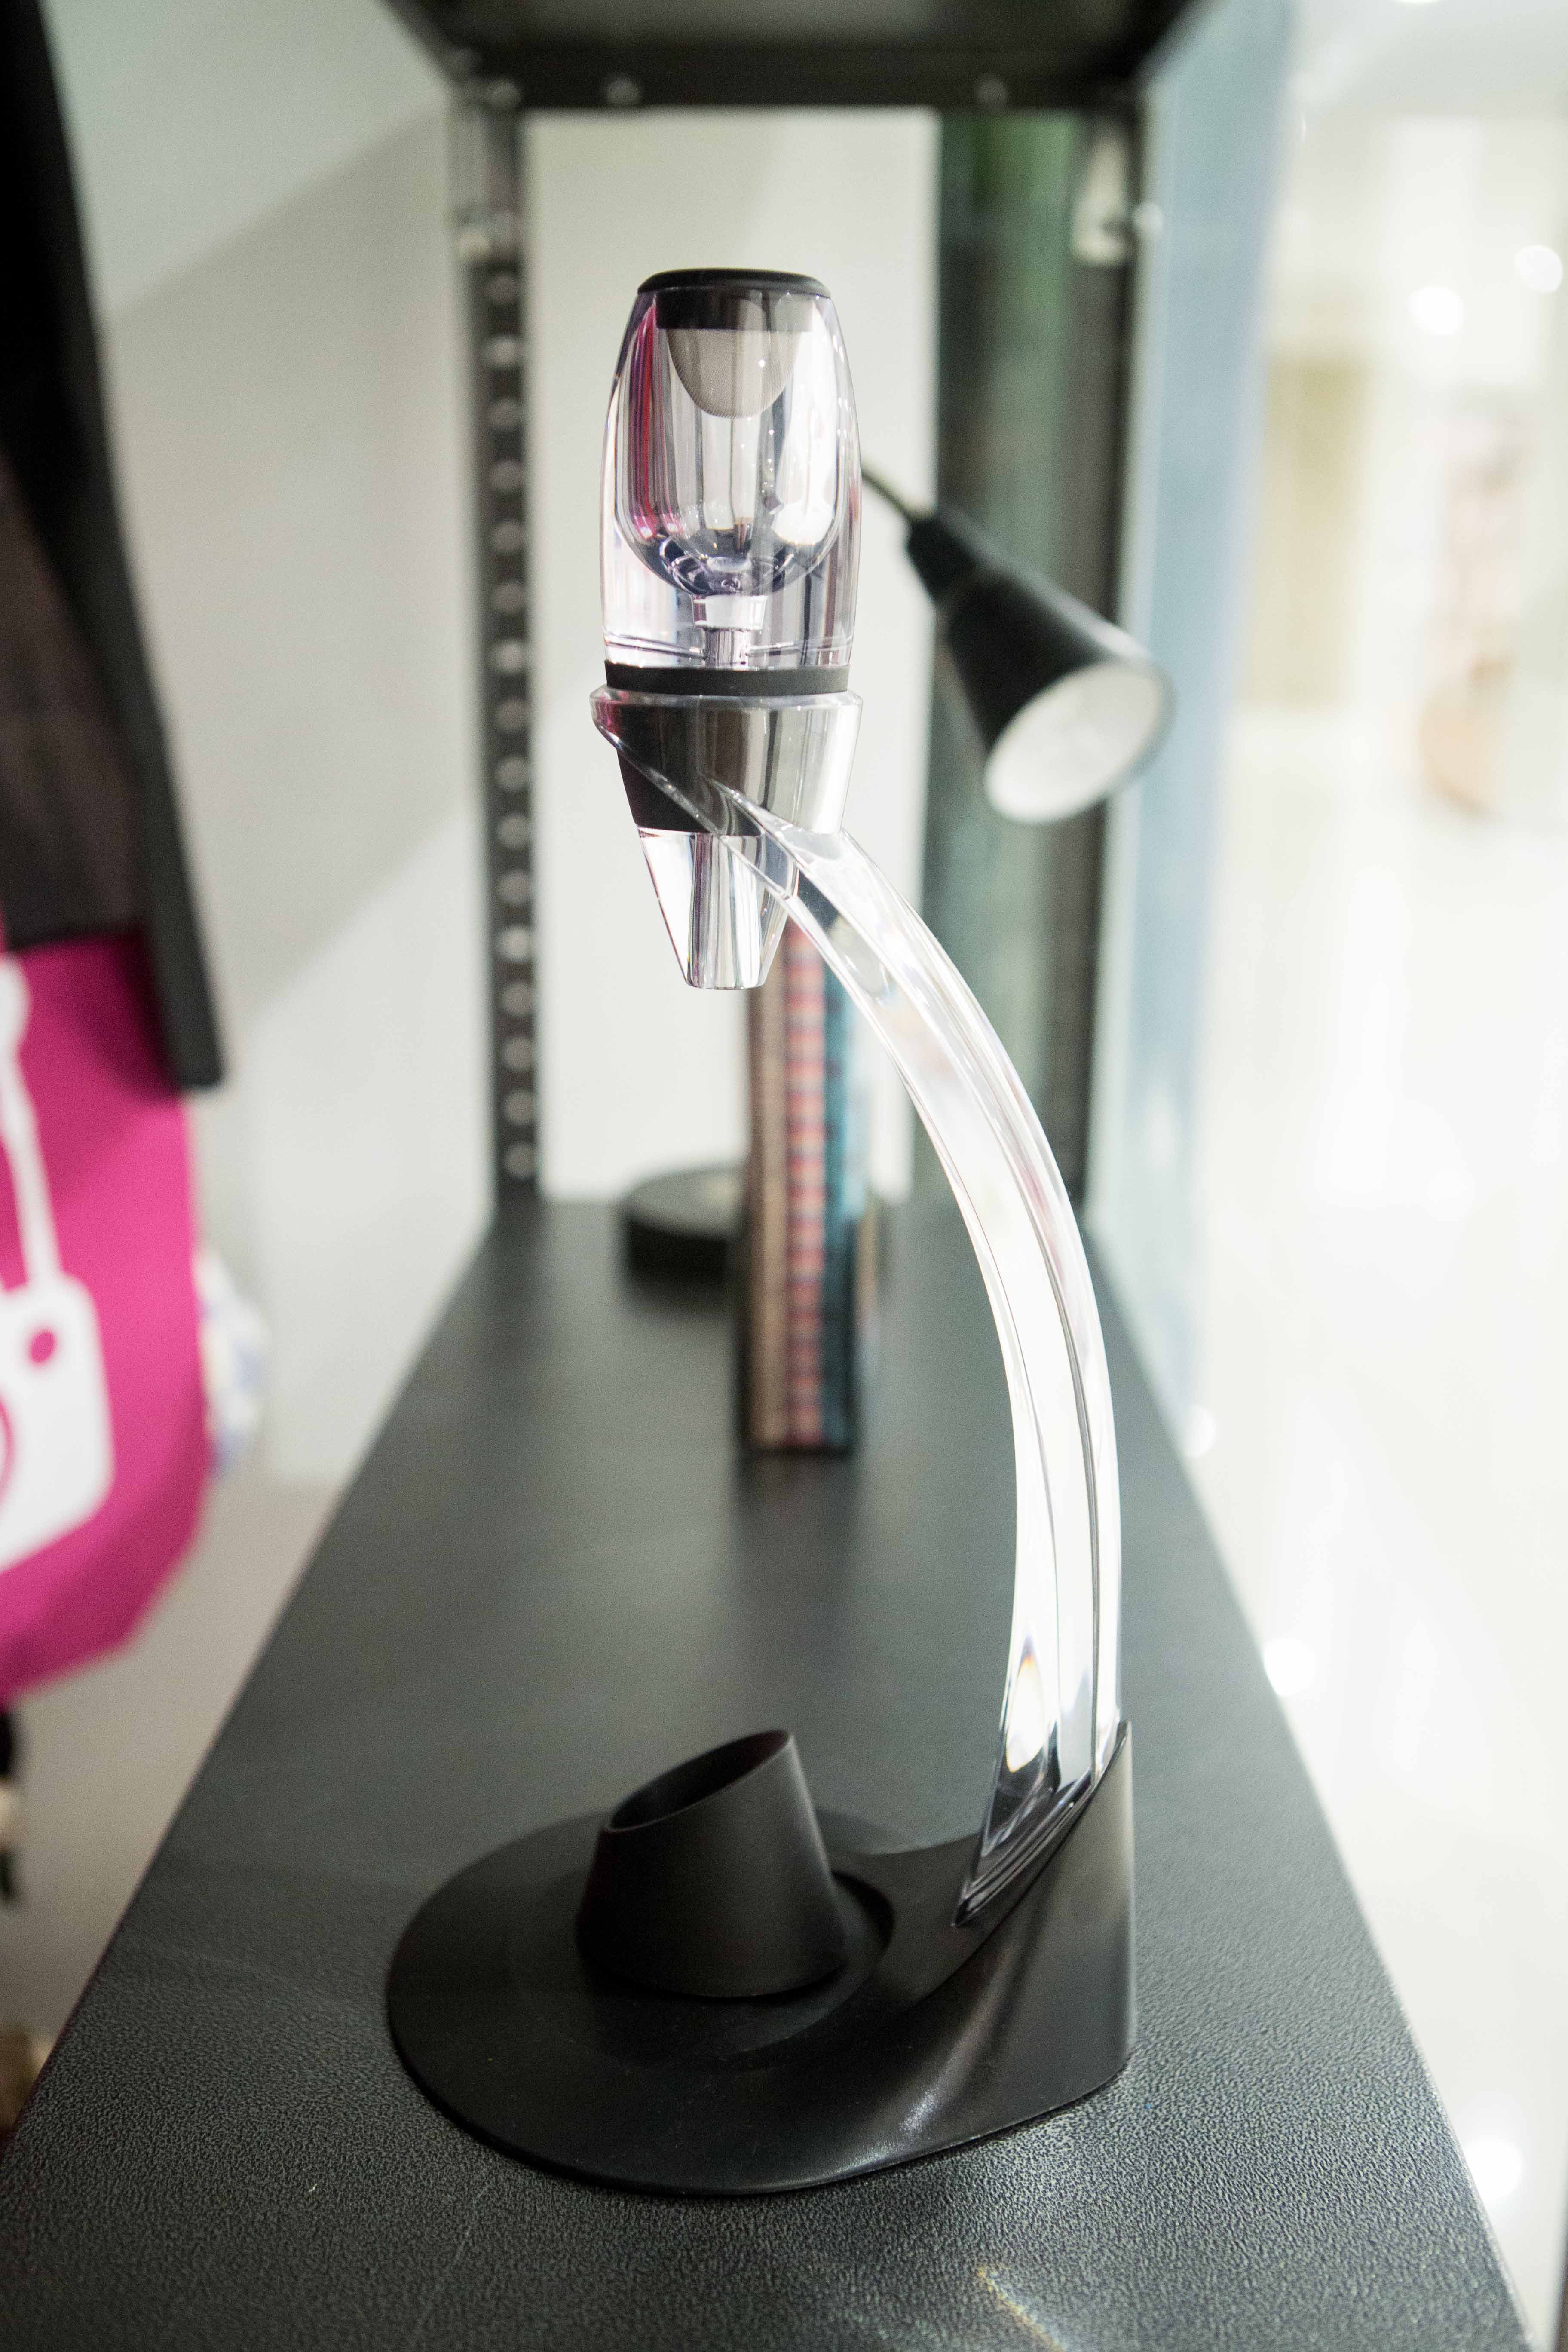 You can enjoy your wine faster without having to wait. The magic decanter “draws in and mixes the proper amount of air for the right amount of time, allowing your wine to breathe instantly”. This aerator is available for P1,800.